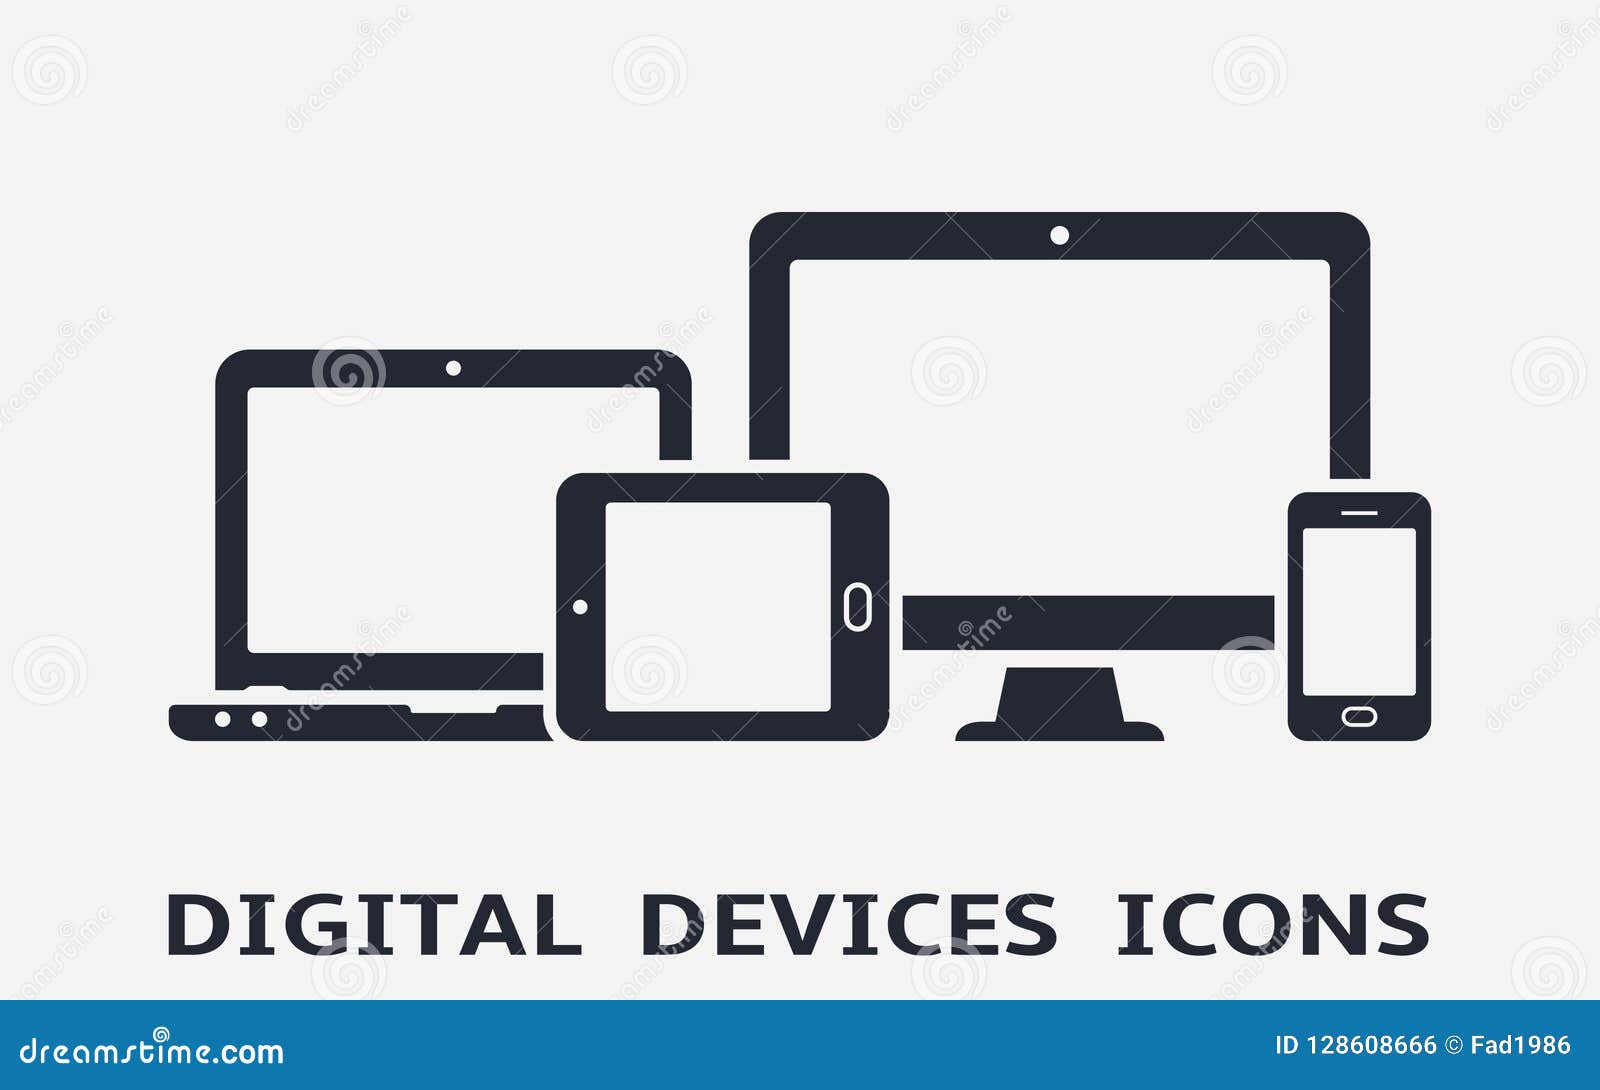 device icons: smart phone, tablet, laptop and desktop computer. responsive web .